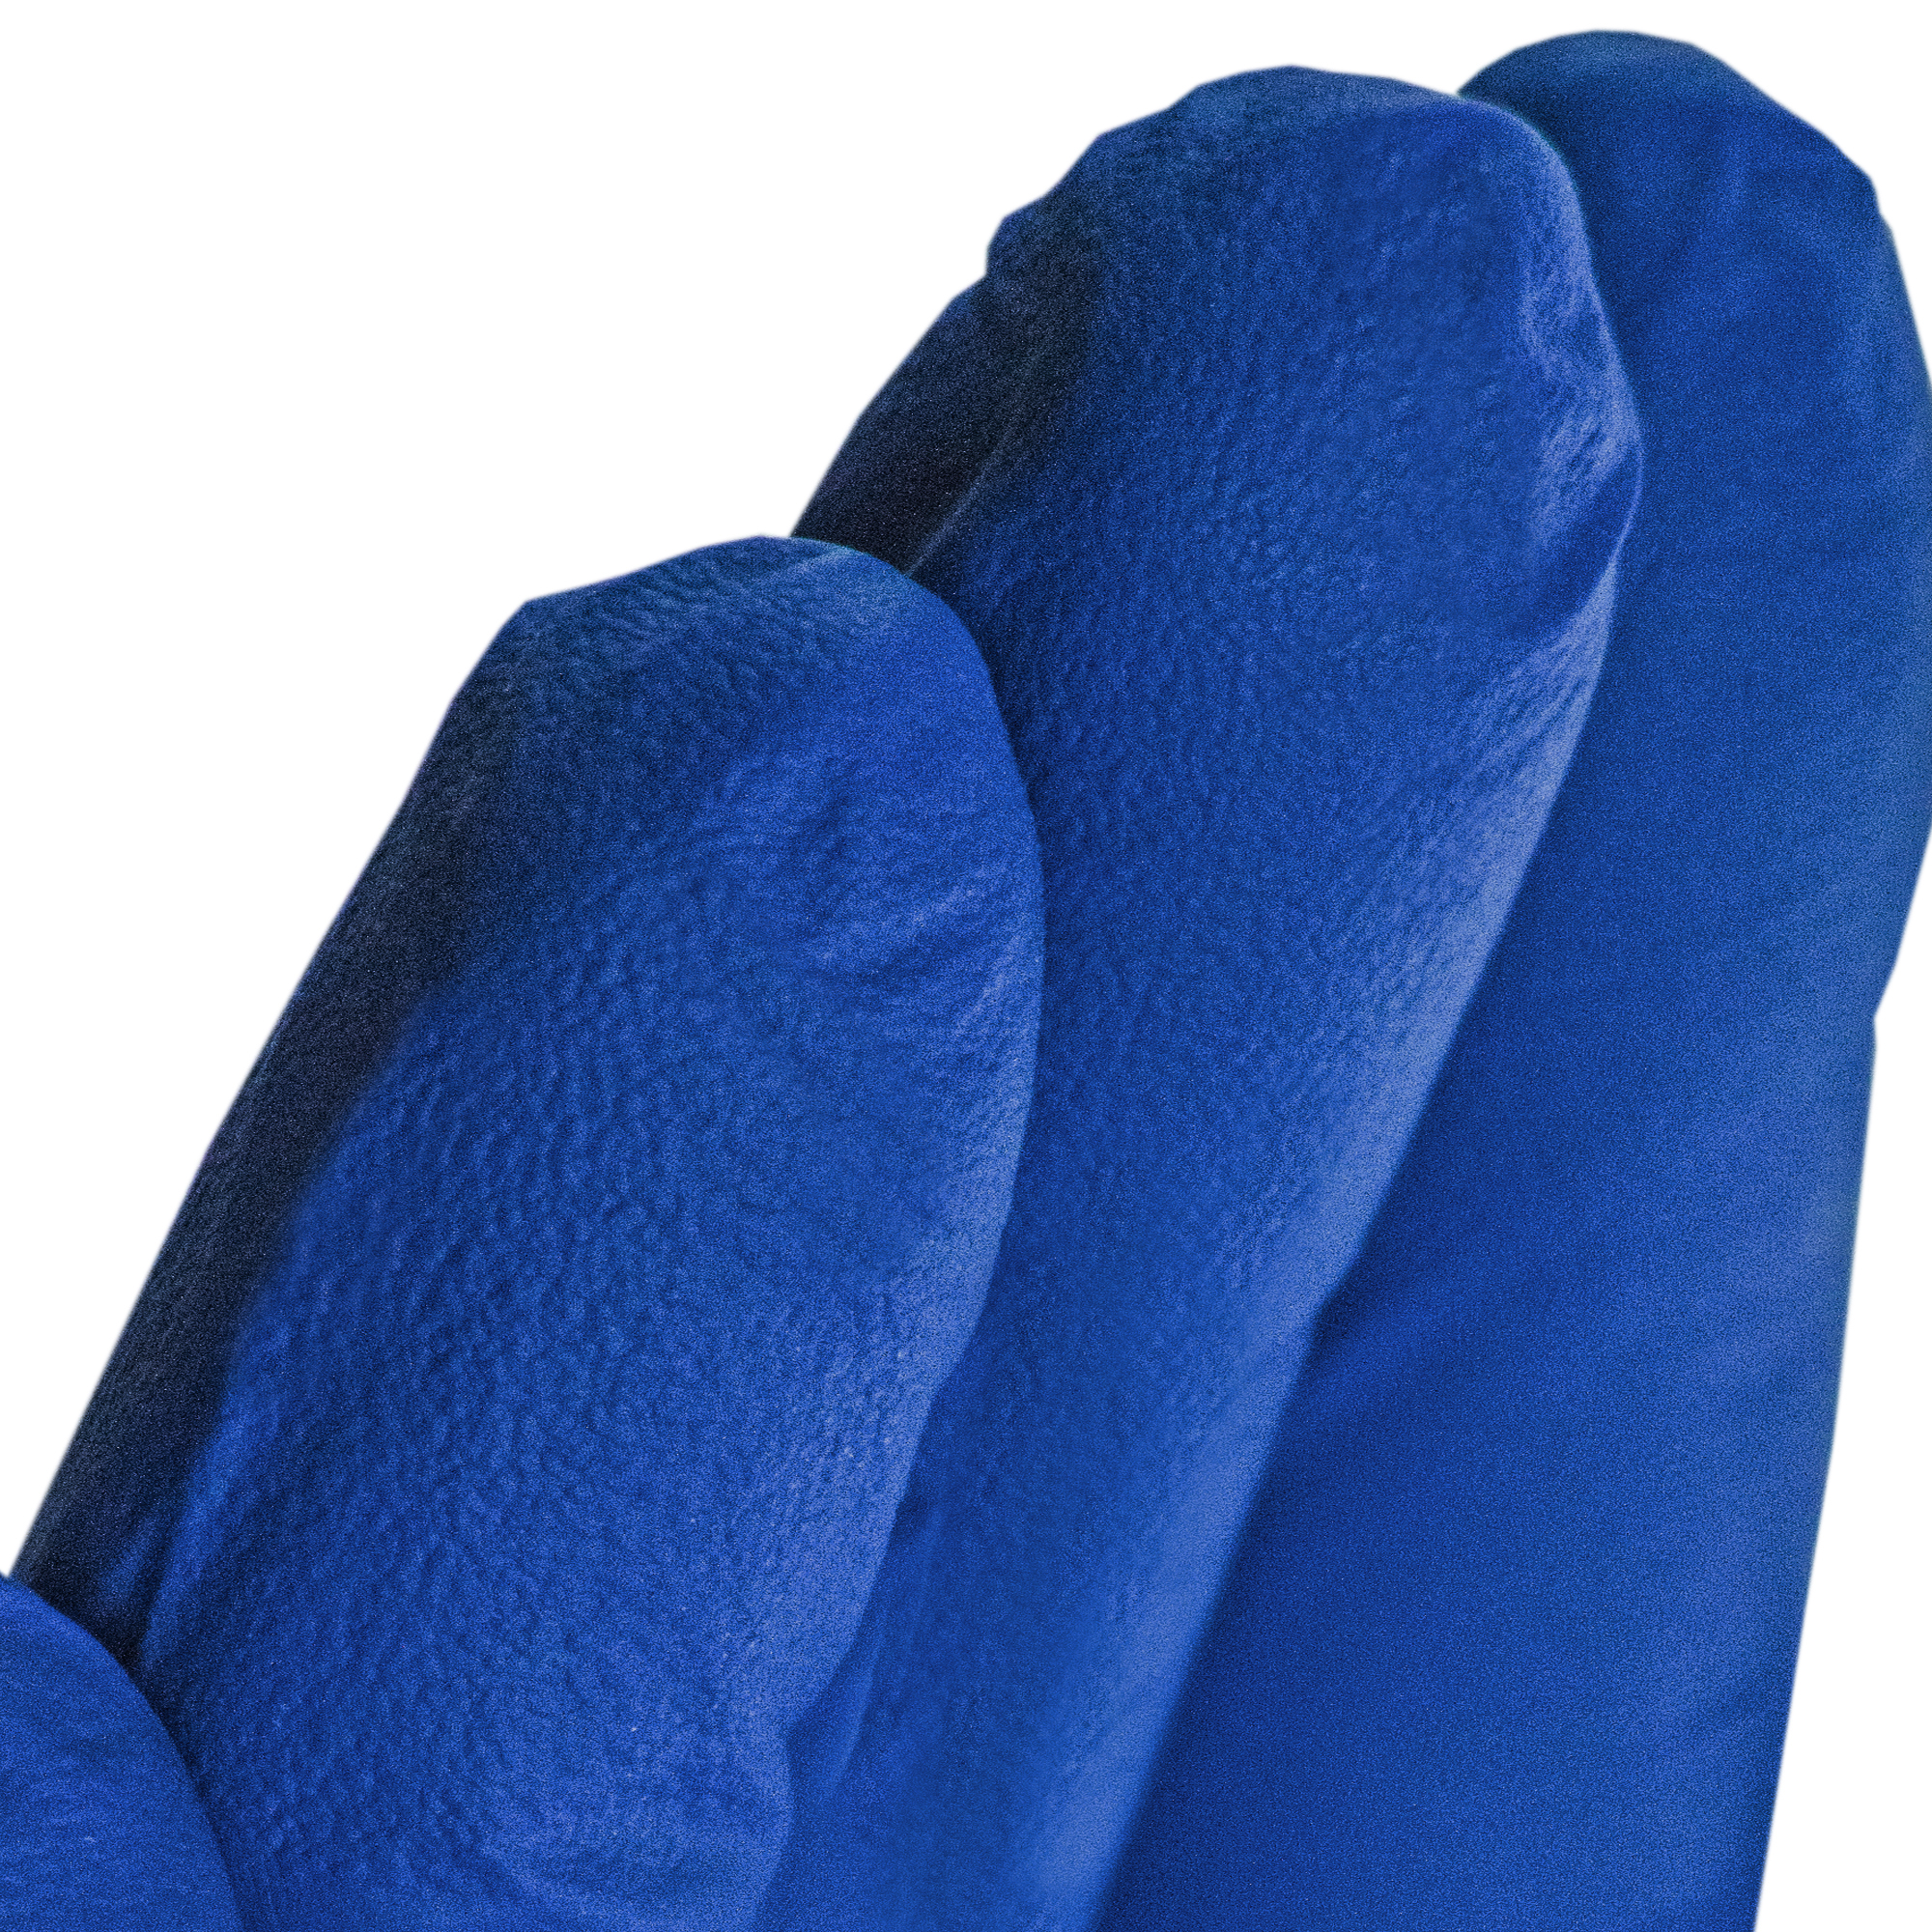 Picture of Exam Glove, Large, Latex,  Powder-Free, 50 EA/BX